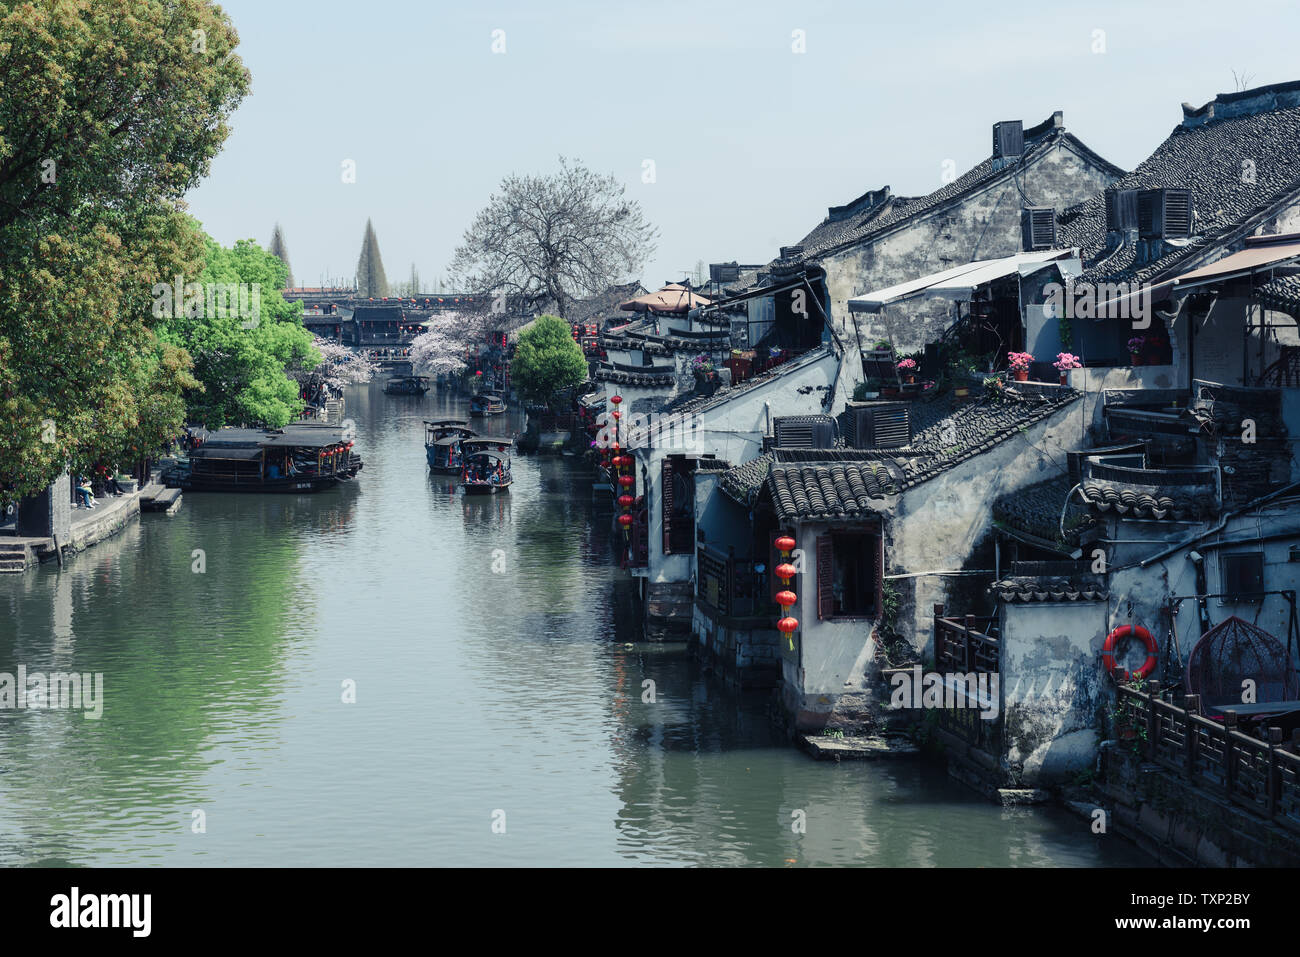 The view of Xitang ancient town.Xitang is first batch of Chinese historical and cultural town, located in Zhejiang Province, China. Stock Photo